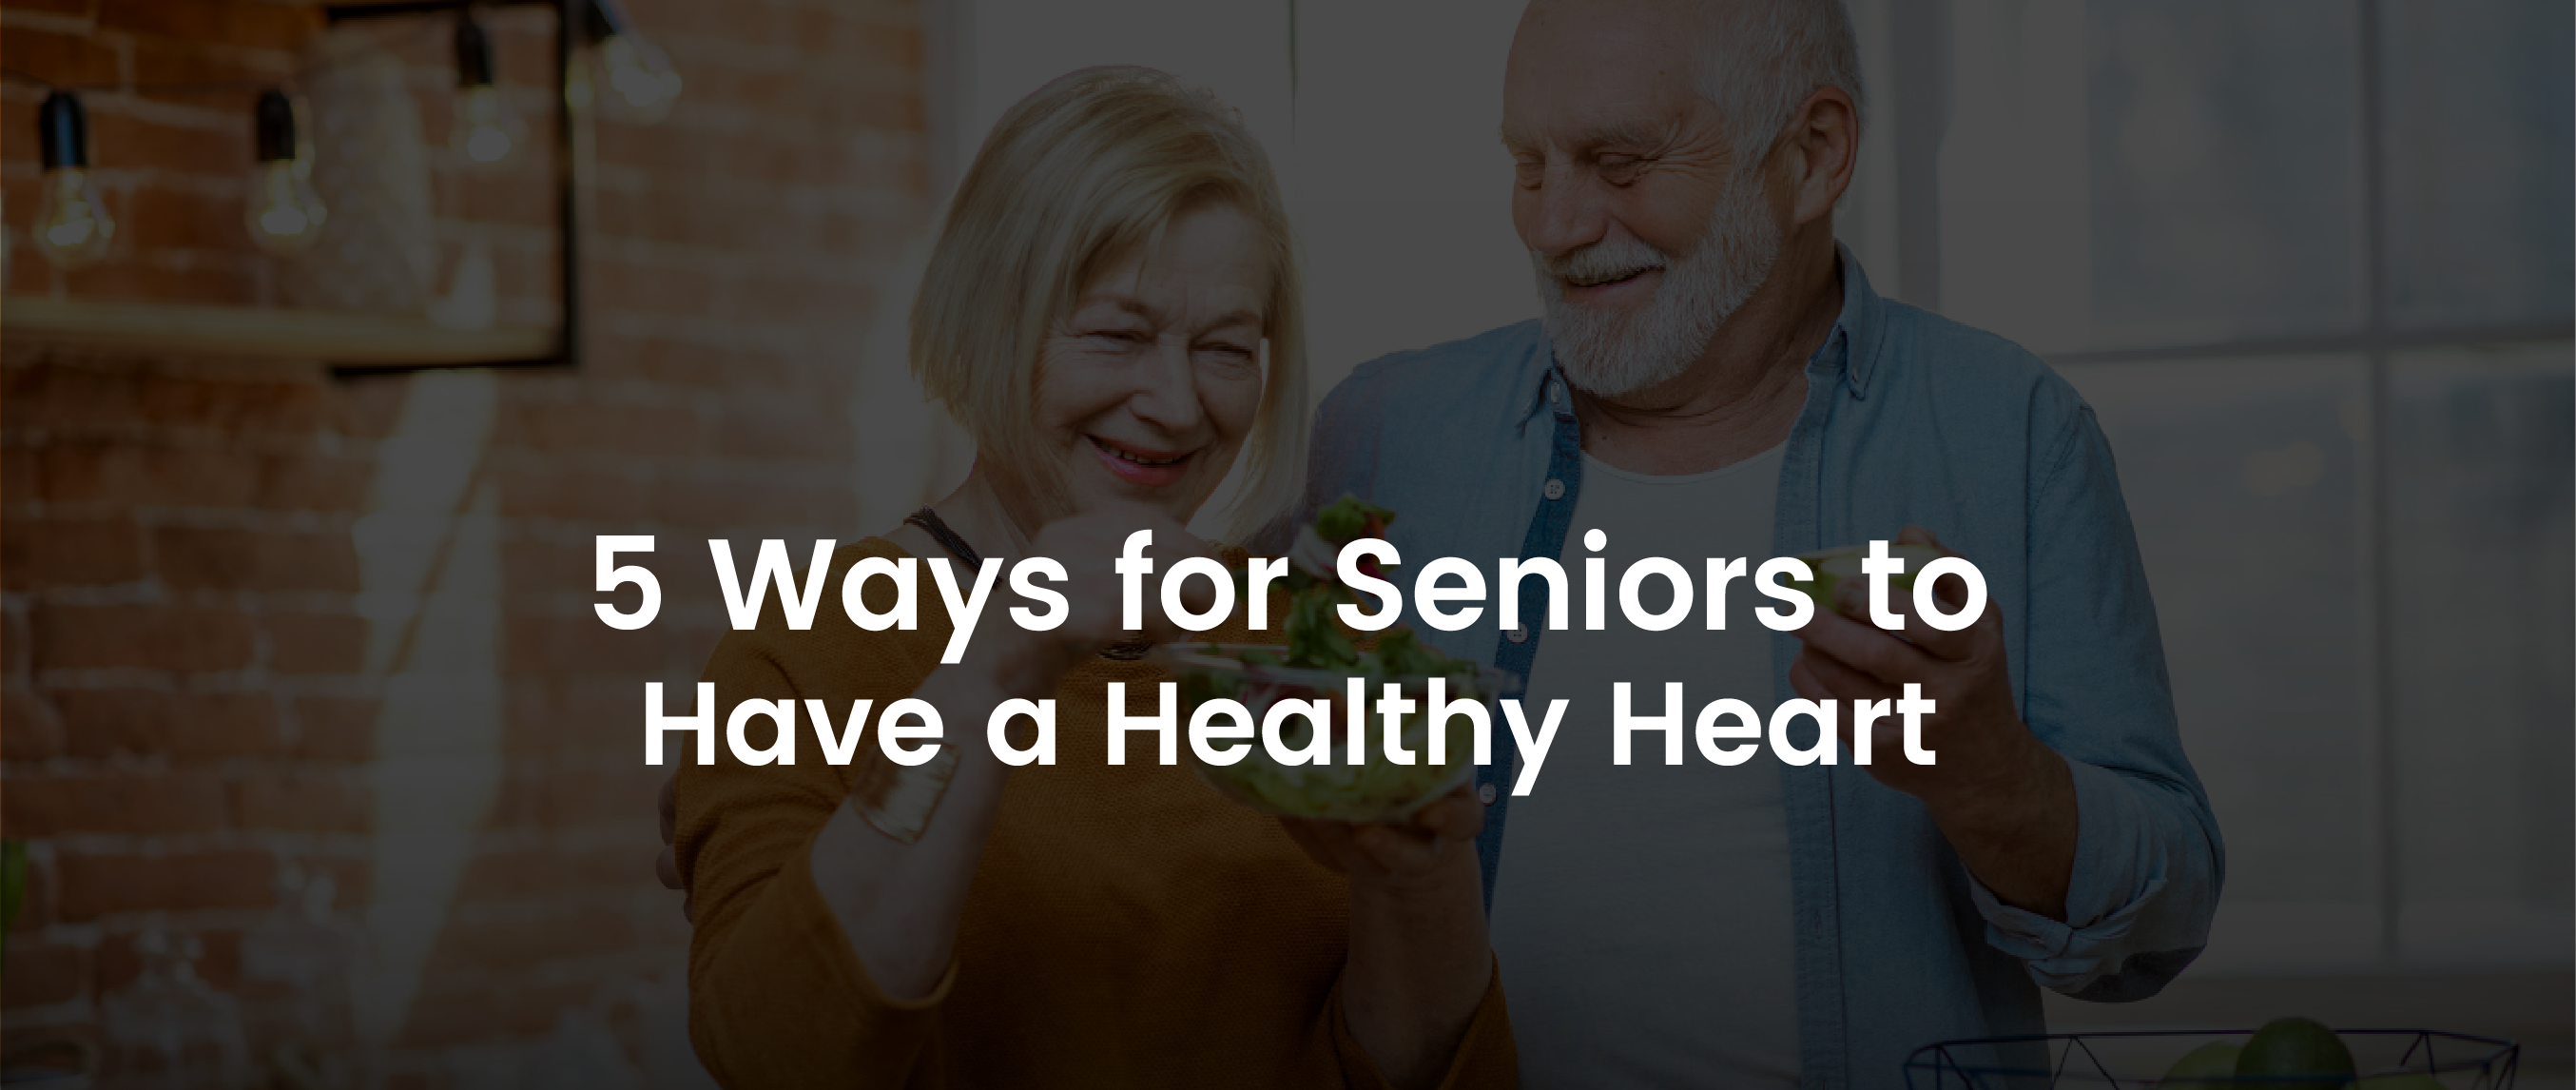 5 Ways for Seniors to Have a Healthy Heart | Banner Image